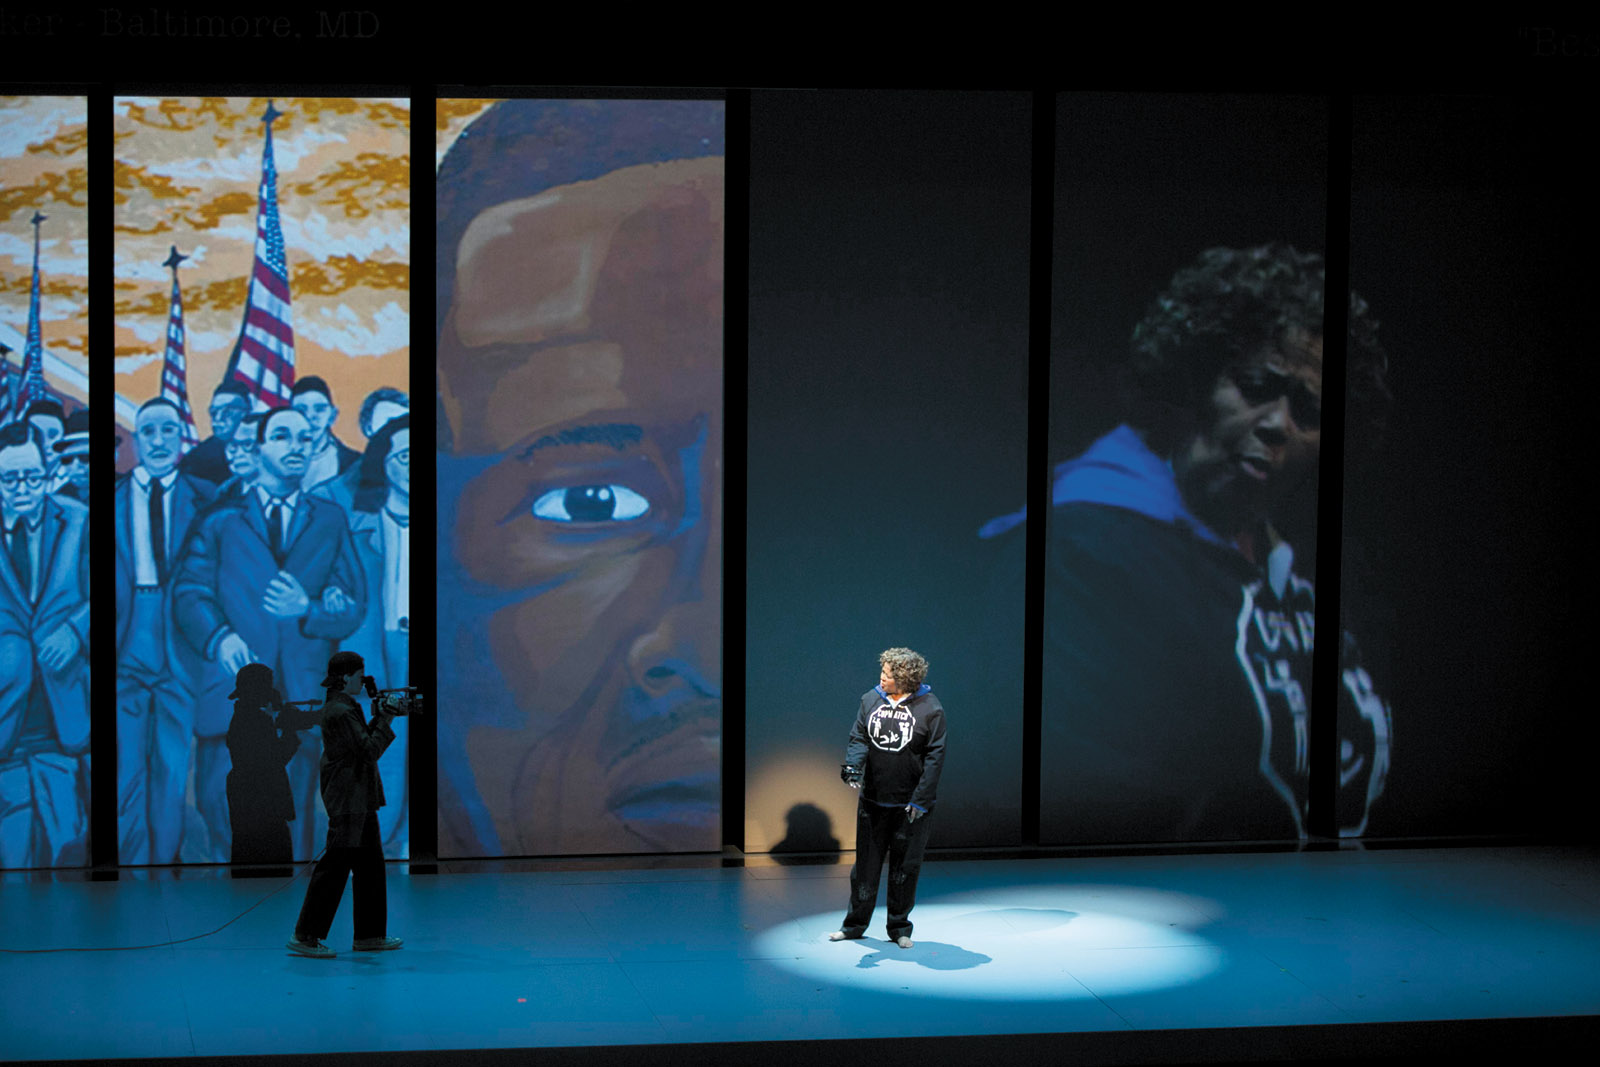 Anna Deavere Smith in Notes from the Field, her play about American education and the criminal justice system, which she performed at the American Repertory Theater, Cambridge, Massachusetts, before the production came to New York